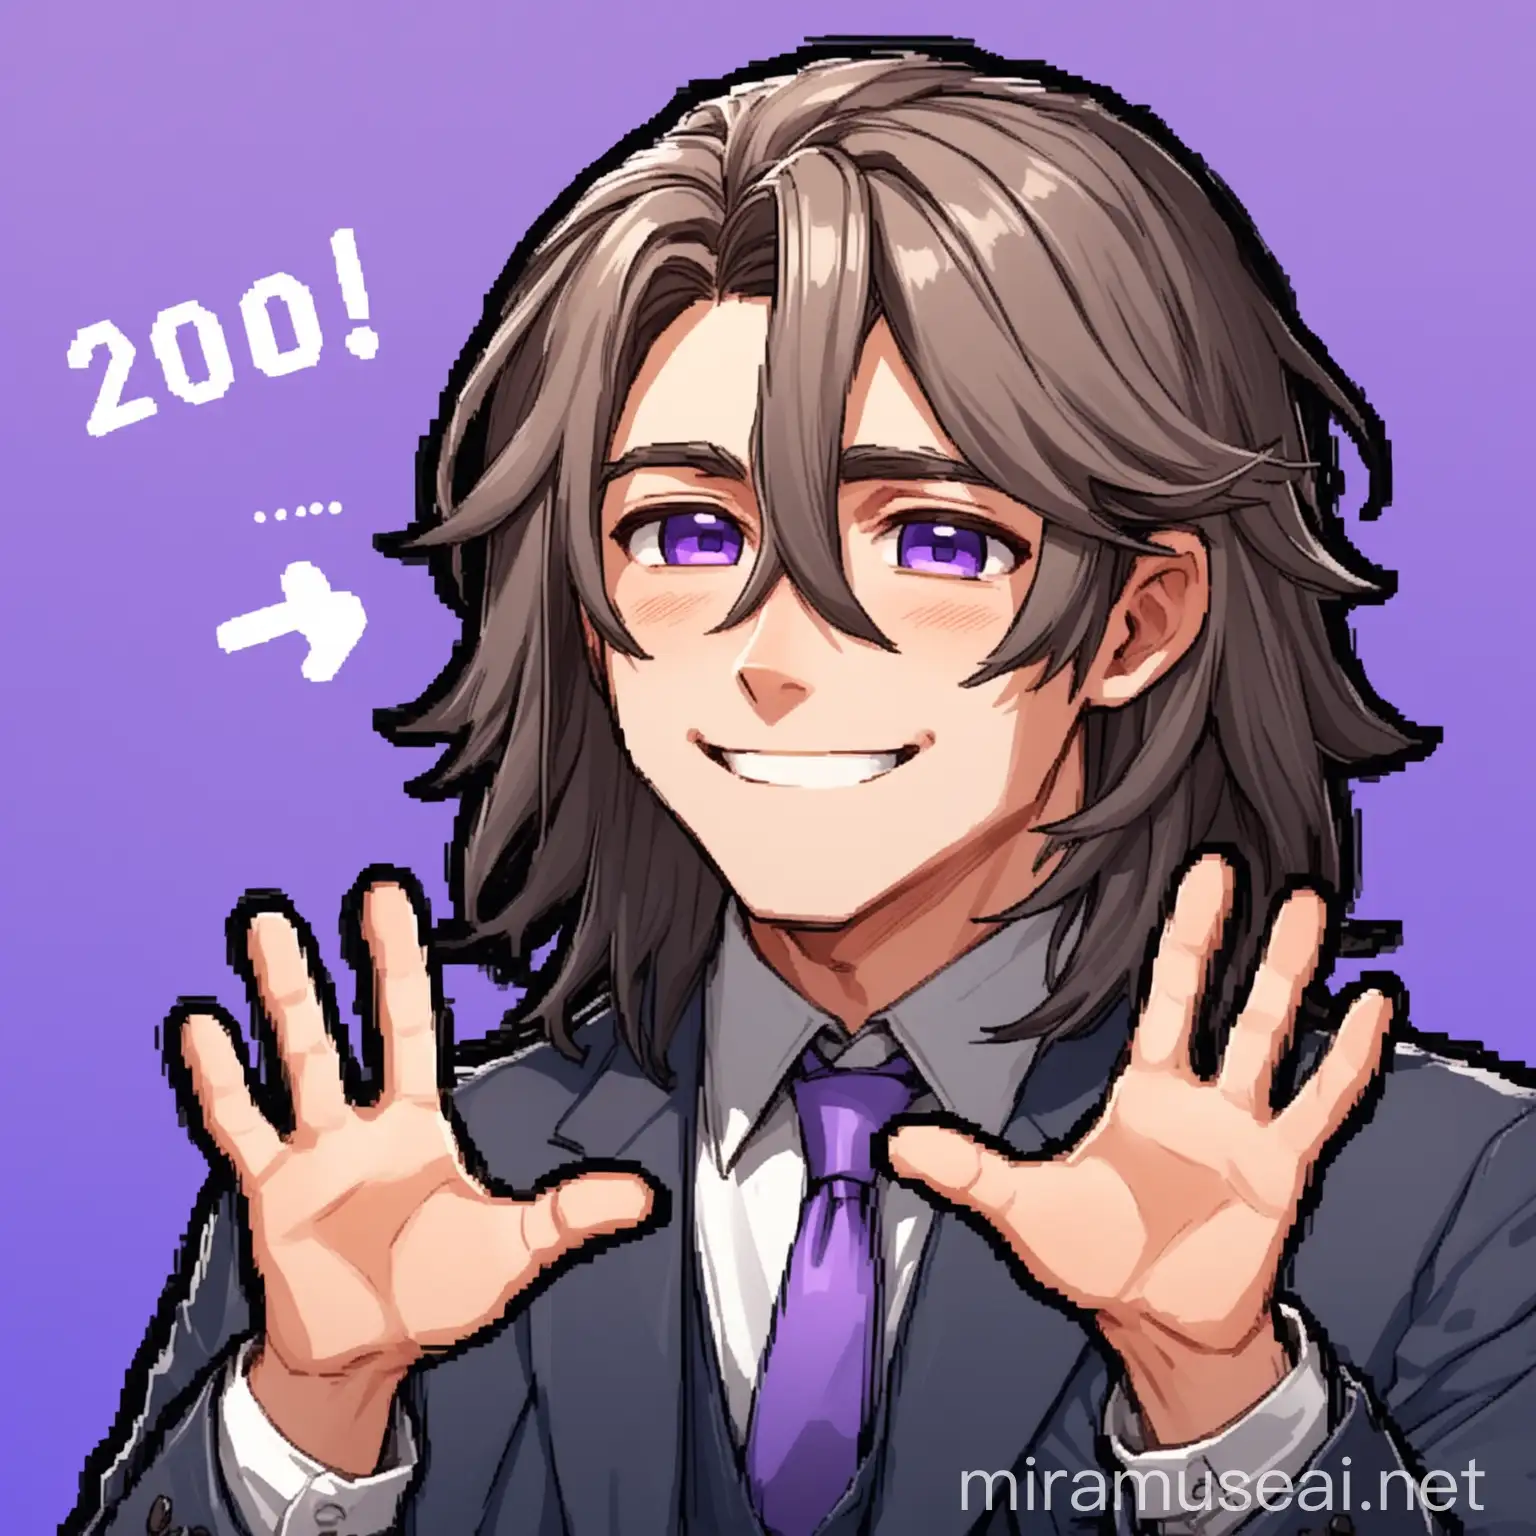 emote for a twitch greeting a man in his 20s with shoulder-length hair